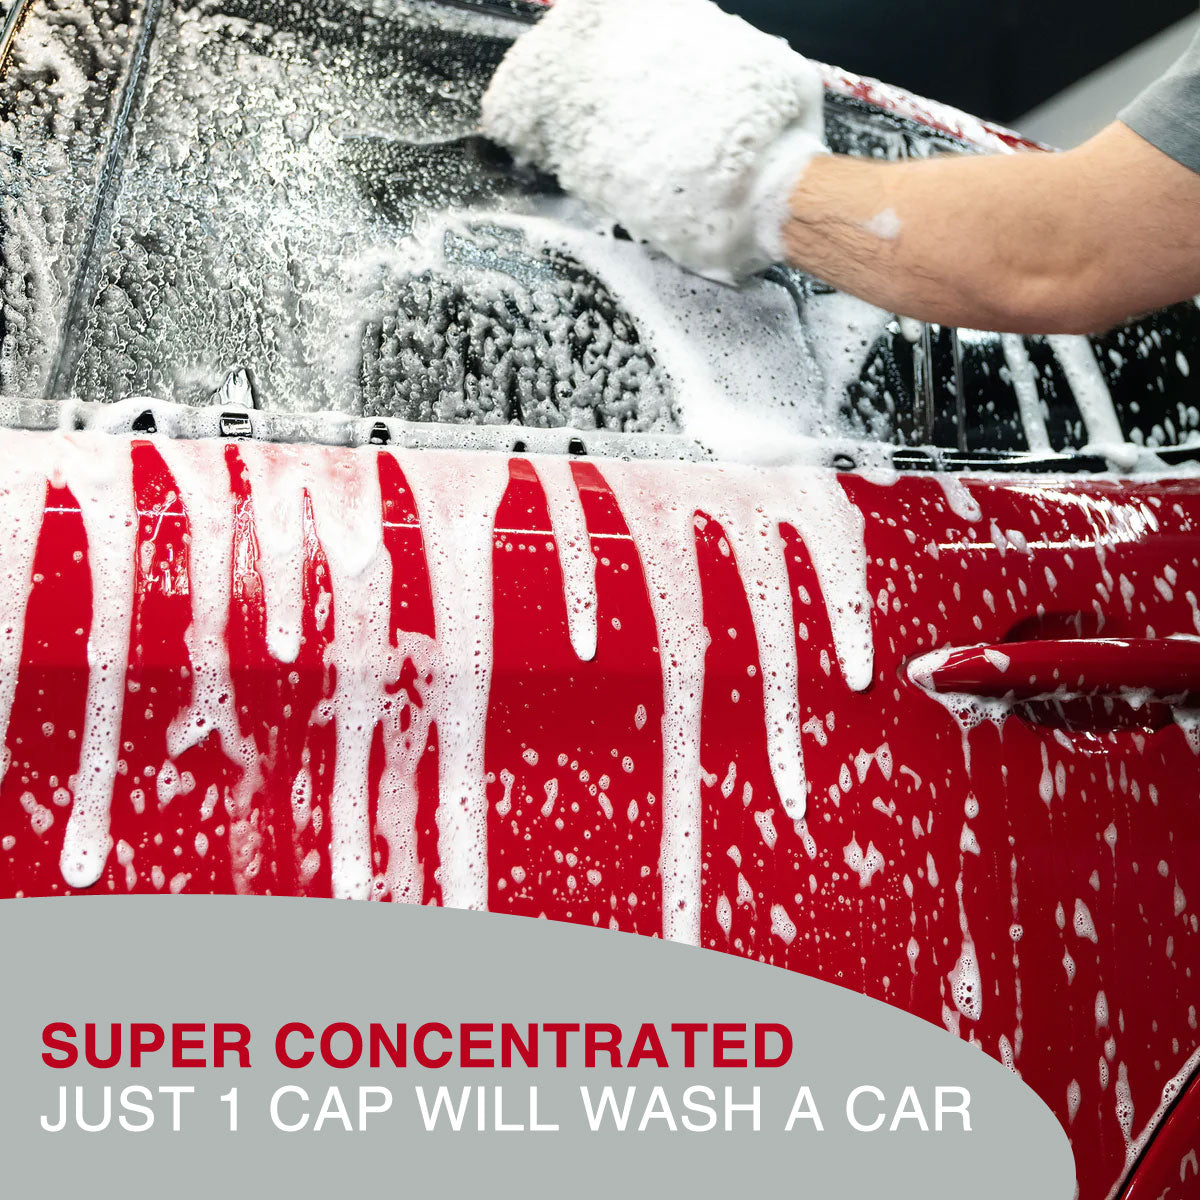 Wash and wax with ease! Turtle Wax Zip Wax is the most traditional of car shampoos, allowing you to shampoo wash your car, cleaning it while leaving behind a rich Carnauba-infused wax layer for instant & lasting shine! - super concentrated